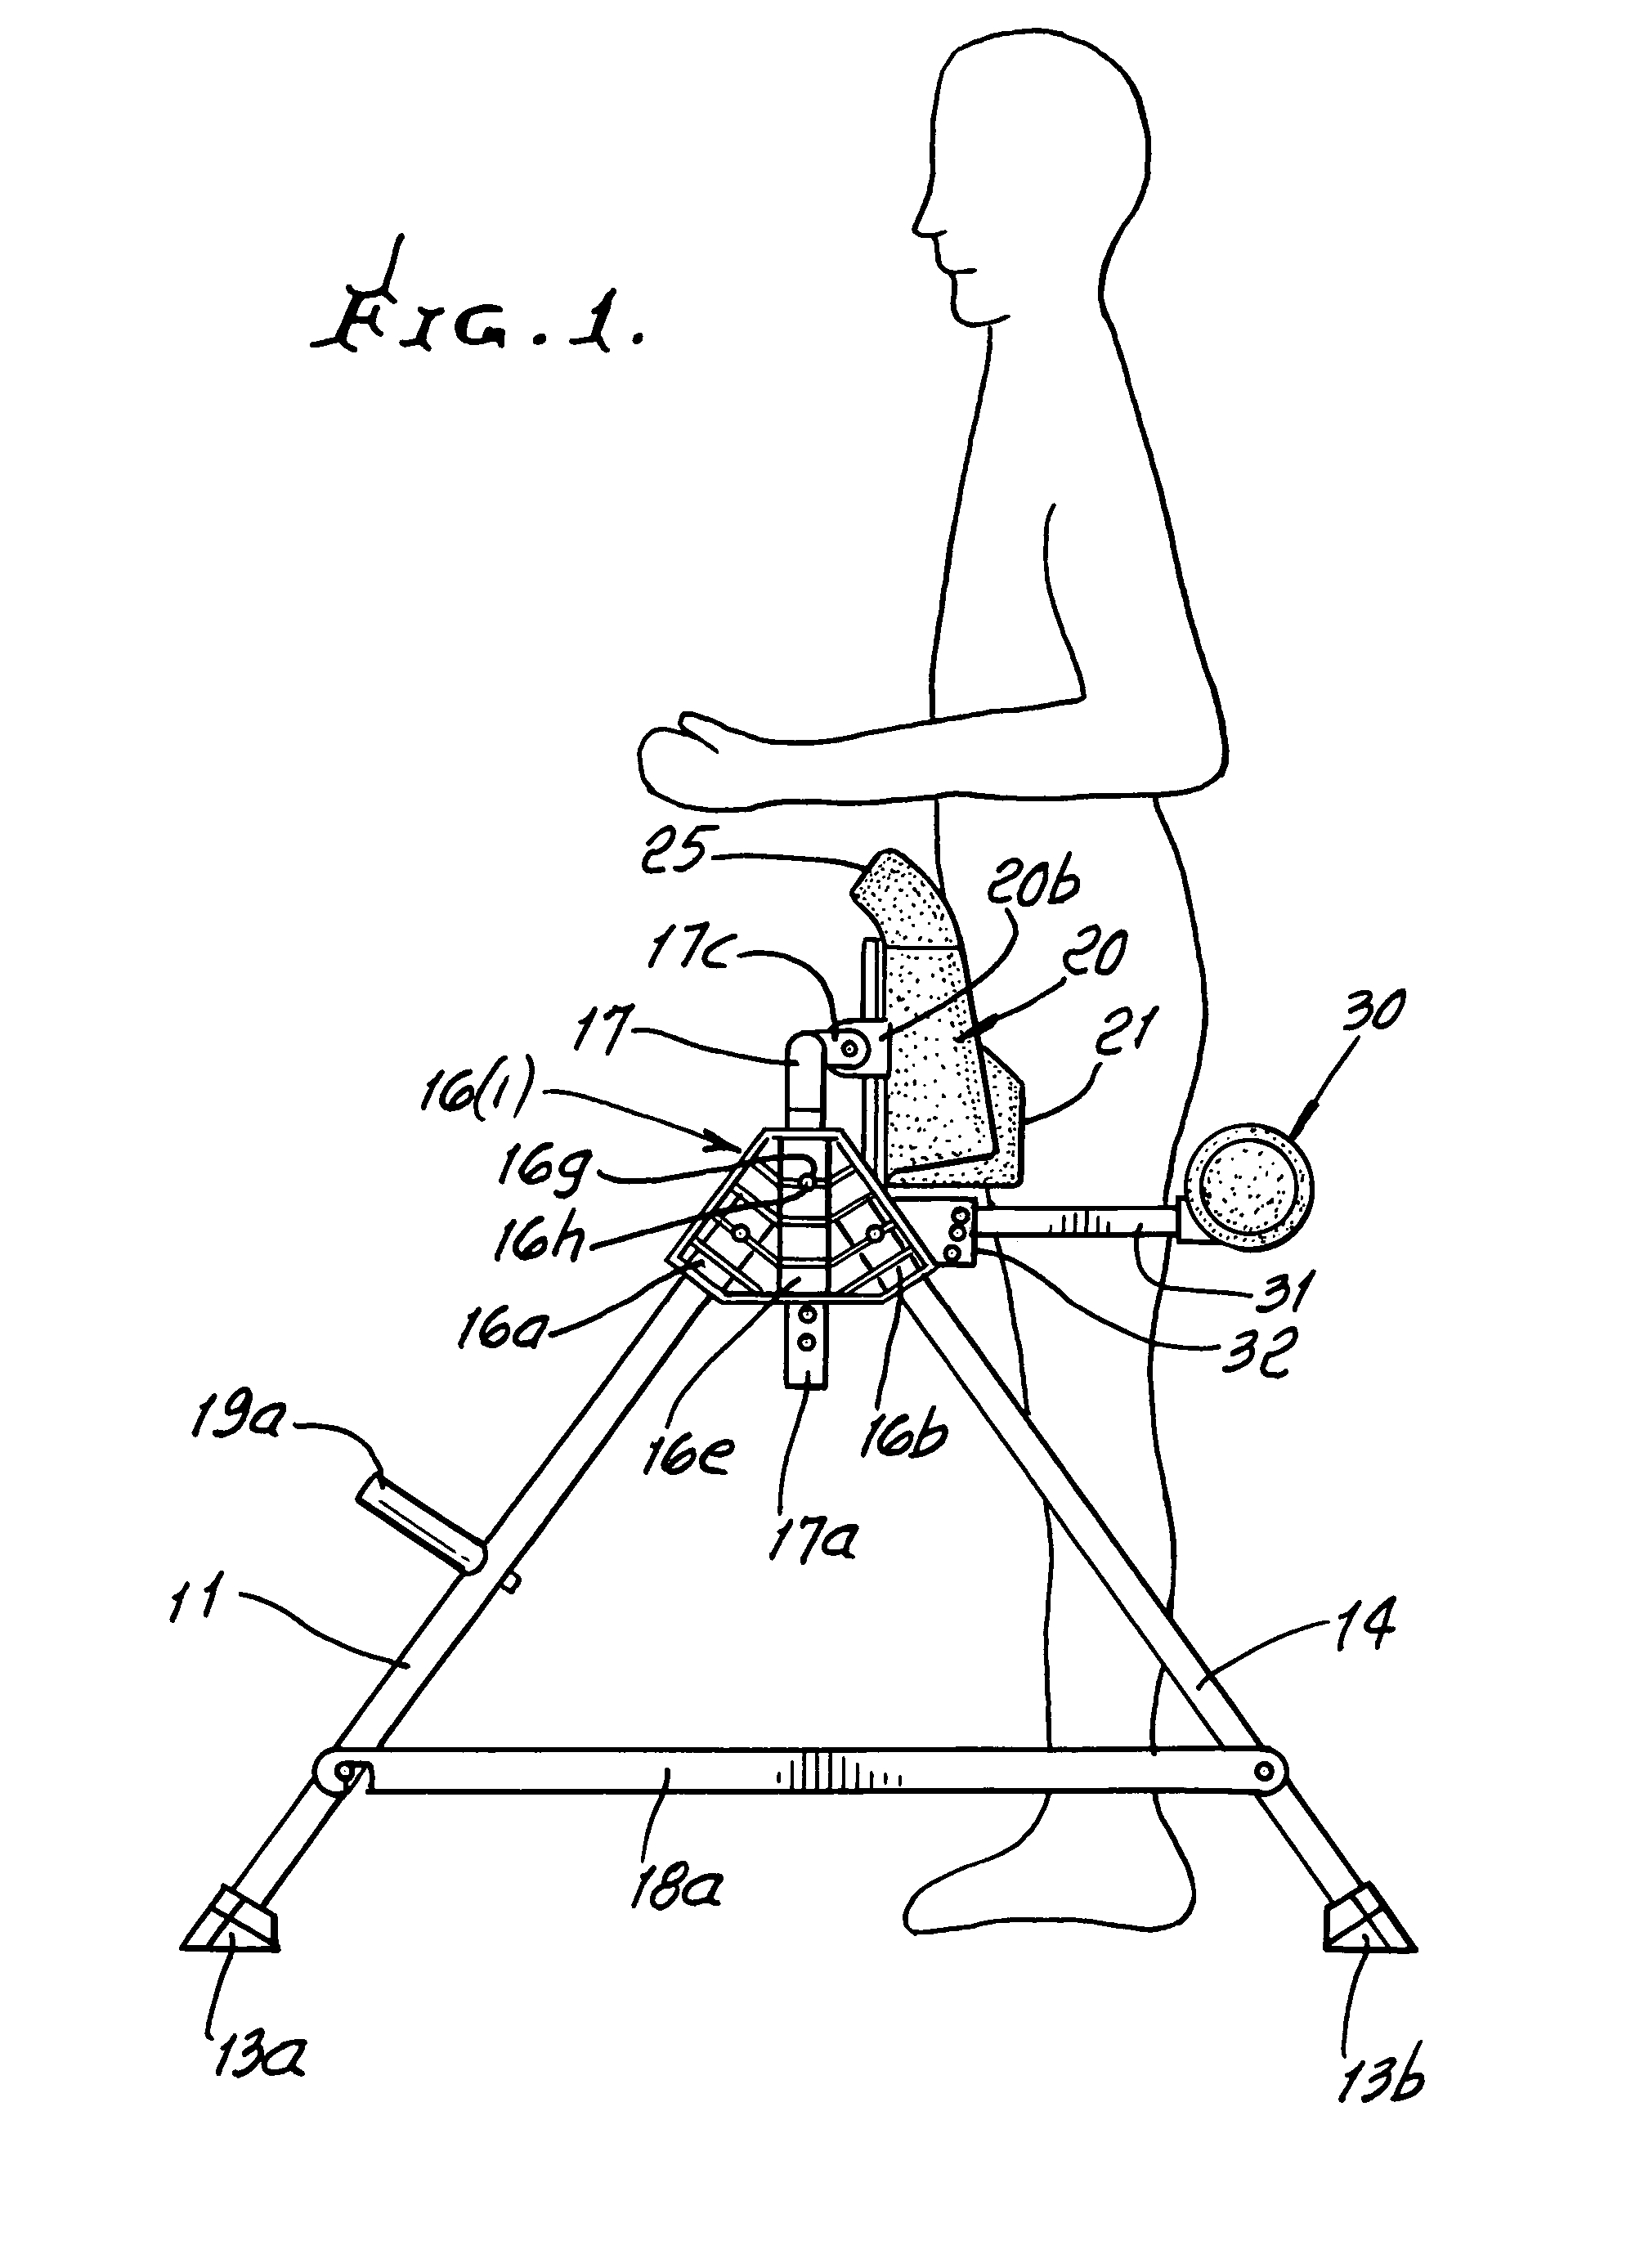 Abductor contraction, variable leg/knee/thigh/trunk and spinal decompression exercise and rehabilitation apparatus and method